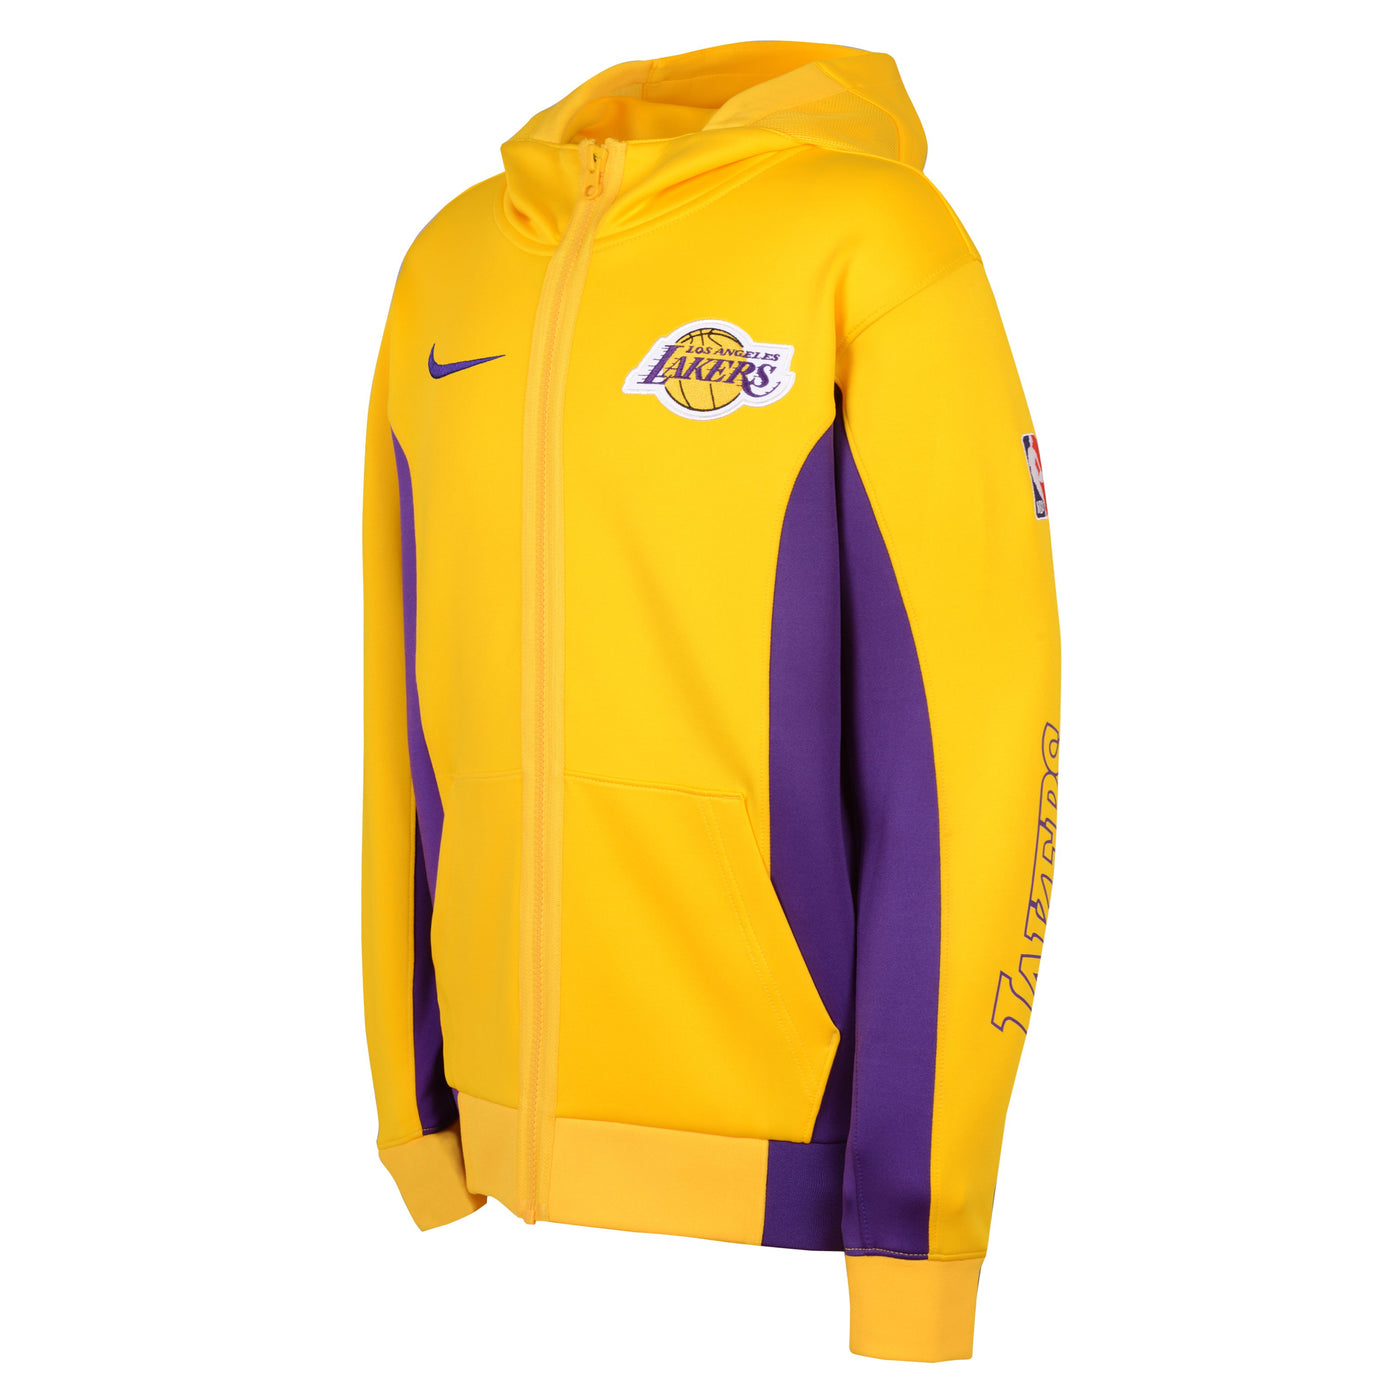 Boys Los Angeles Lakers Showtime Dri-Fit Hoodie